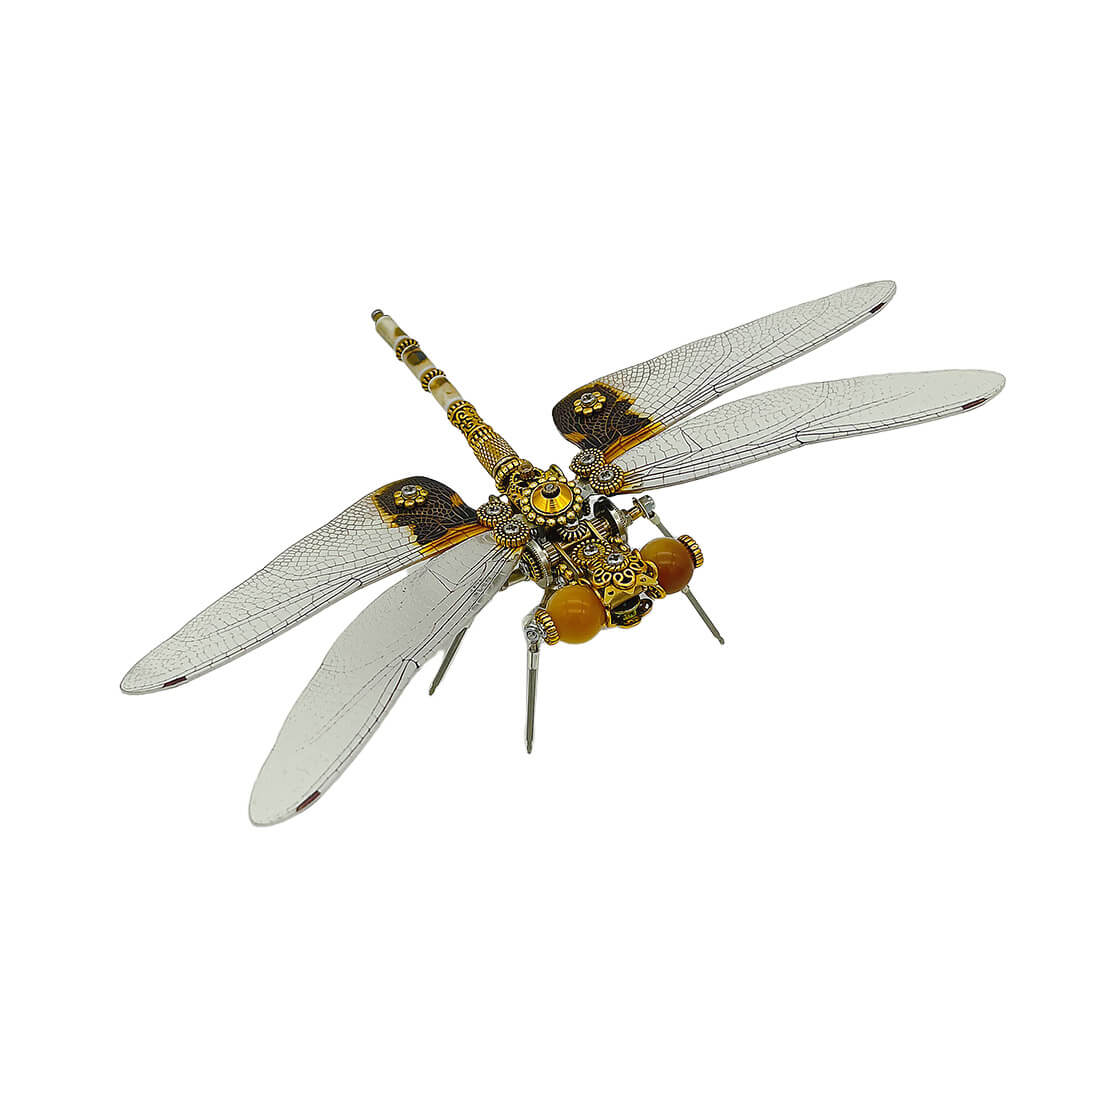 Mechanical Punk Large Dragonfly 3D DIY Insects Model Metal Assembly Toy Creative Ornament (200PCS)